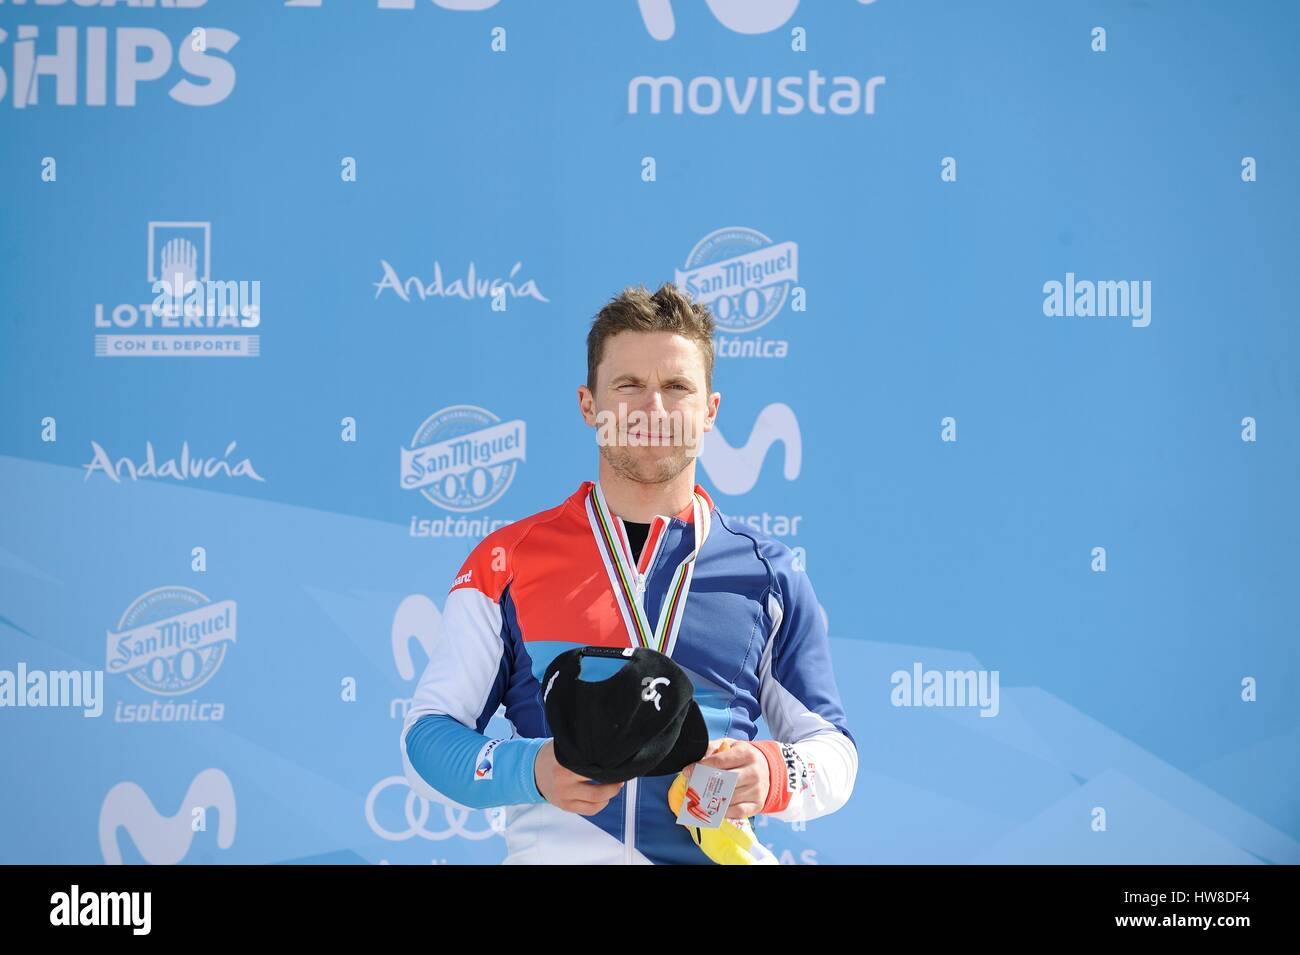 Sierra Nevada, Spain. 16th Mar, 2017. Nevin Galmarini (SUI) Snowboarding : Bronze medalist Nevin Galmarini of Switzerland poses with his medal during the medal ceremony for the 2017 FIS Snowboard World Championships Men's Parallel Giant Slalom in Sierra Nevada, Spain . Credit: Hiroyuki Sato/AFLO/Alamy Live News Stock Photo